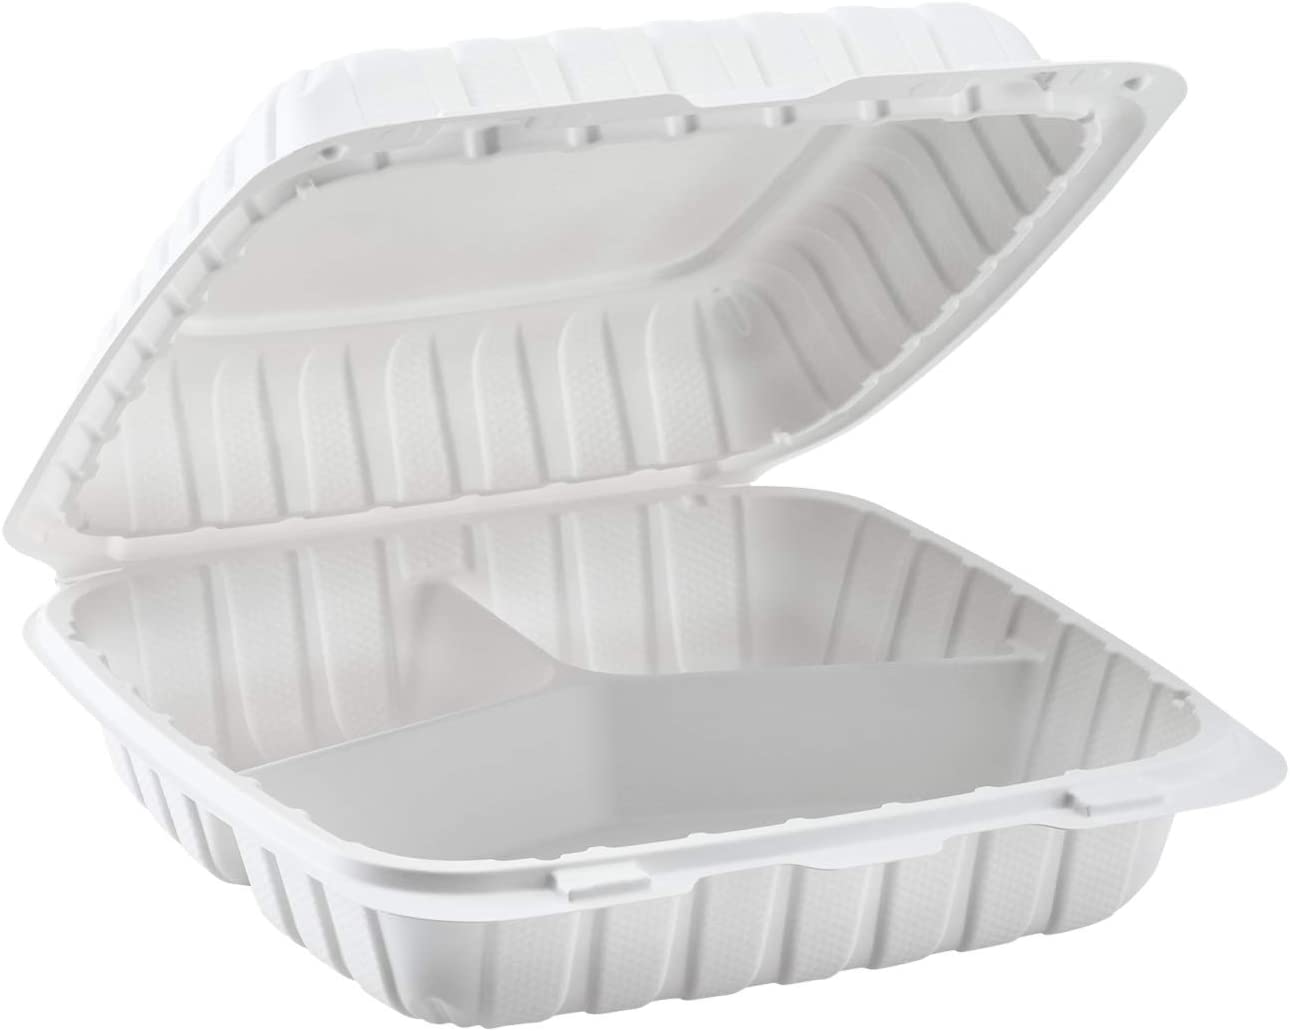 8833W Emerald Mineral Filled Hinged Food Containers, 8-in x 8-in x-3-in, 3 Compartment White